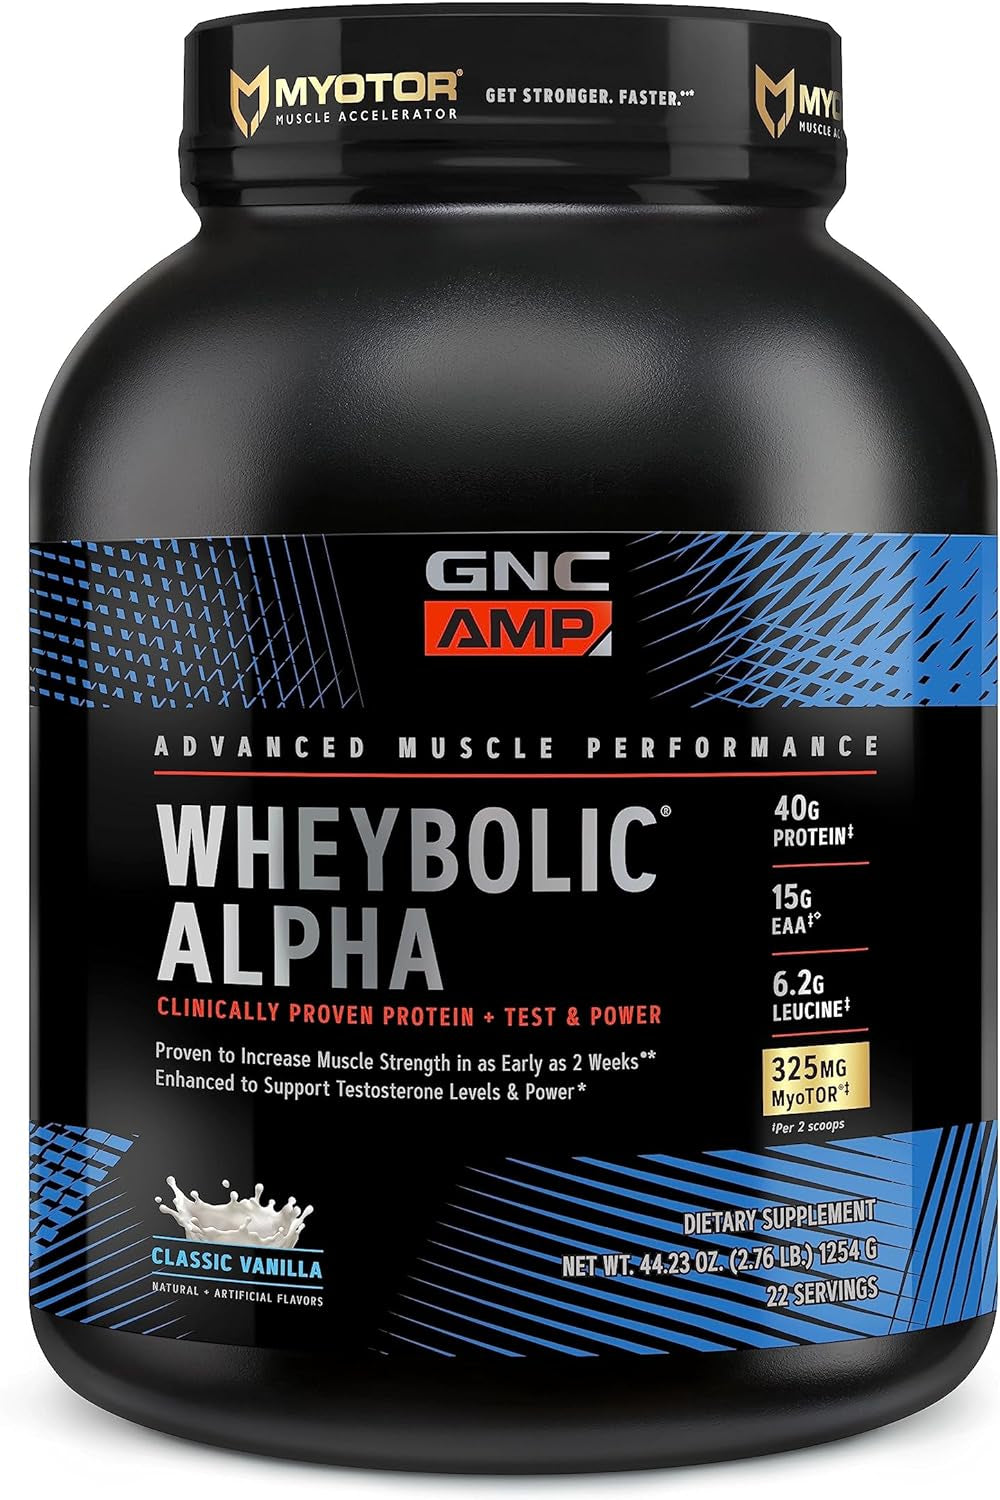 GNC AMP Wheybolic Alpha with Myotor Protein Powder | Targeted Muscle Building and Workout Support Formula with BCAA | 40G Protein | Classic Vanilla | 22 Servings